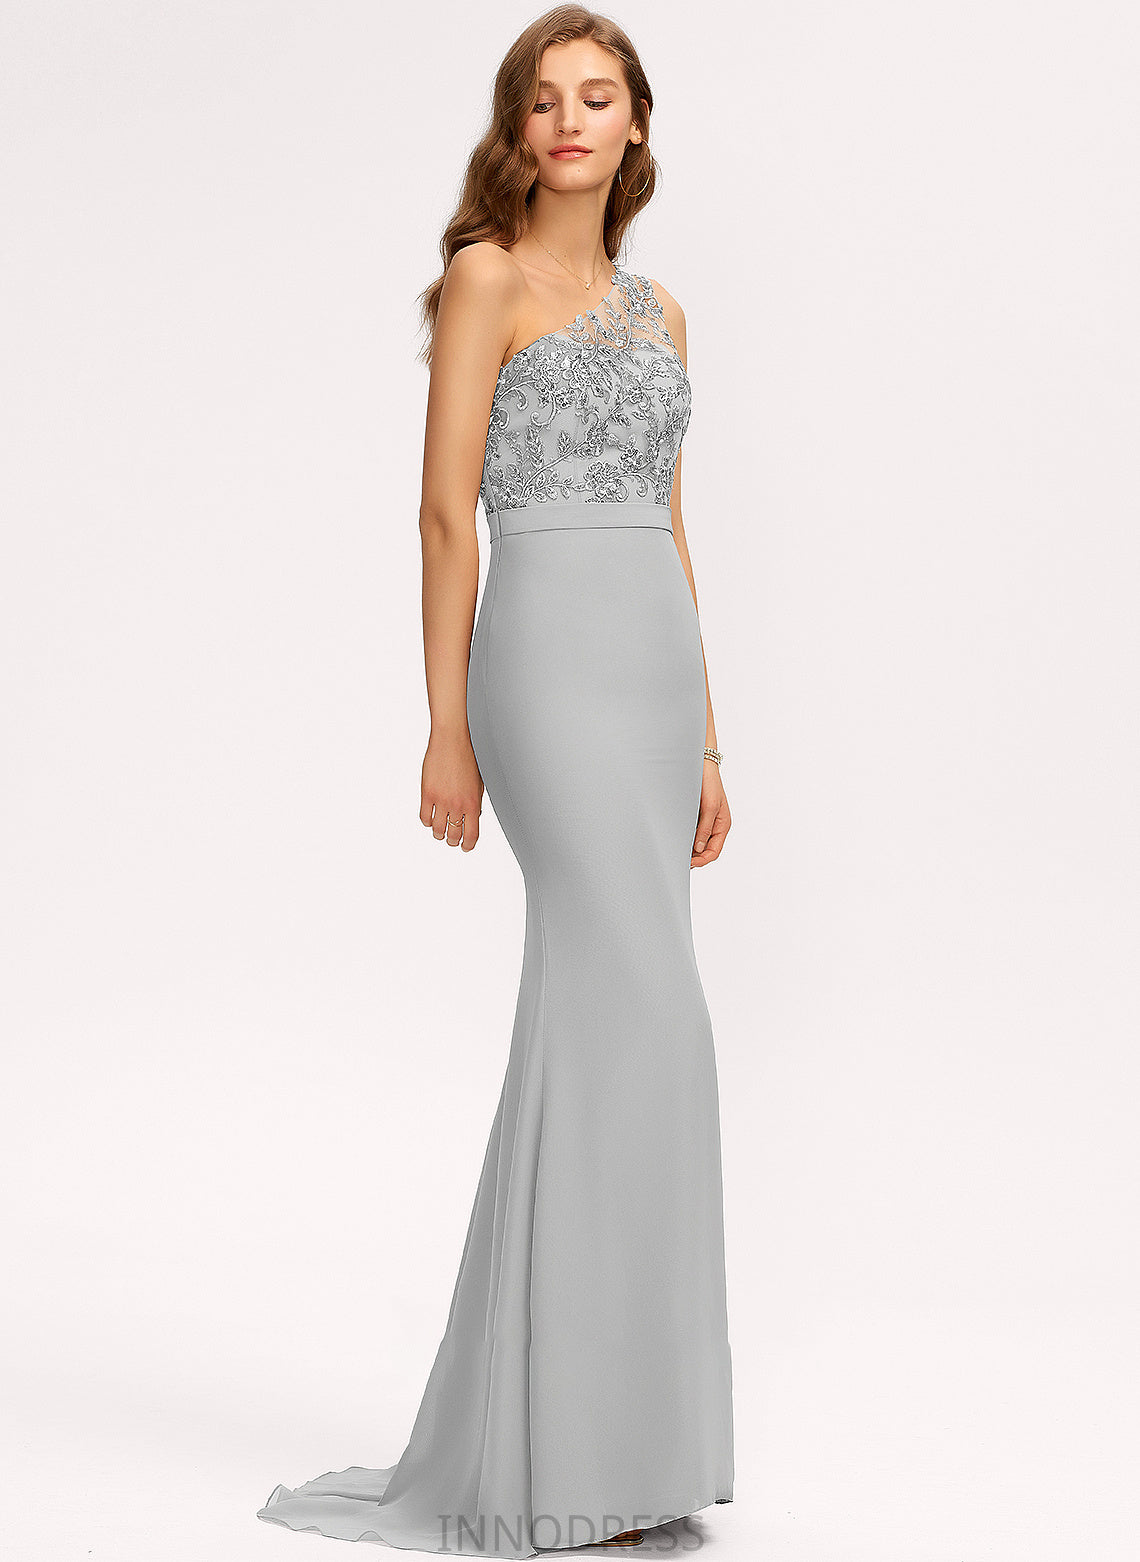 Length Lace Silhouette One-Shoulder Straps Trumpet/Mermaid Neckline Fabric SweepTrain Diana Off The Shoulder Sleeveless